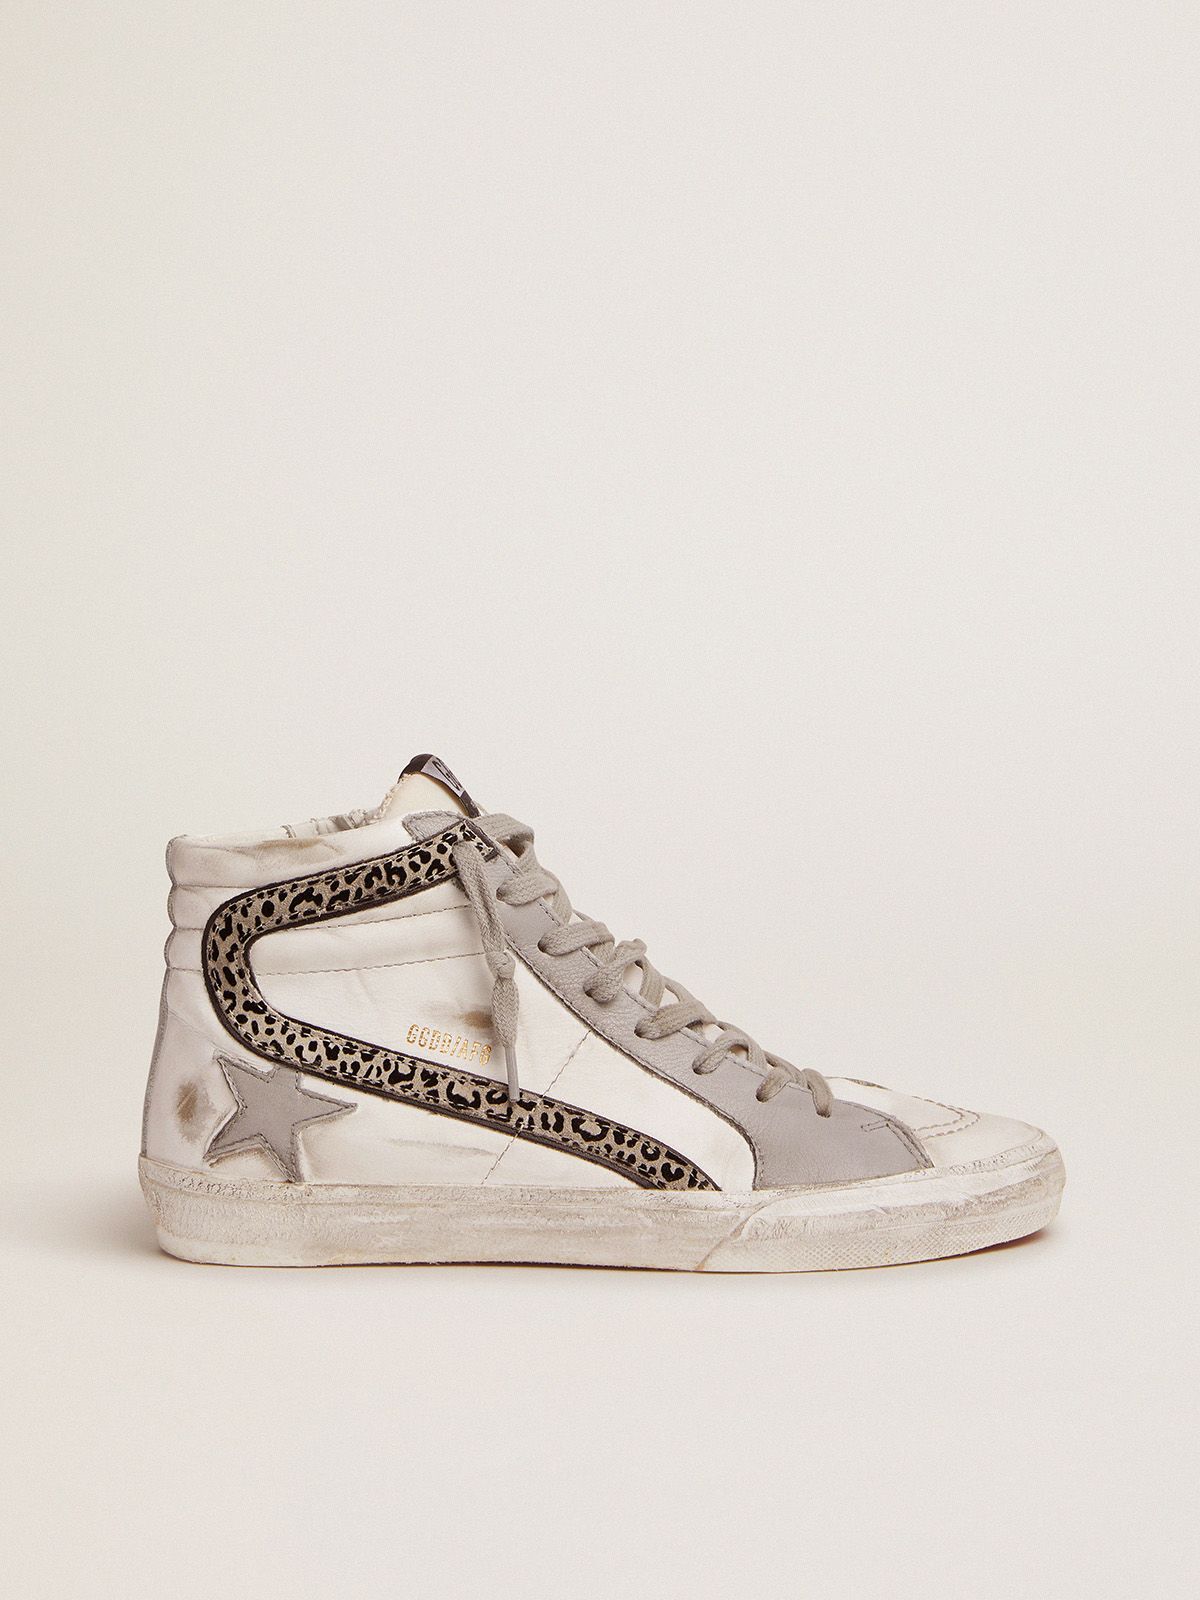 Golden Goose Bambina Slide sneakers with white and gray leather upper and leopard-print suede flash